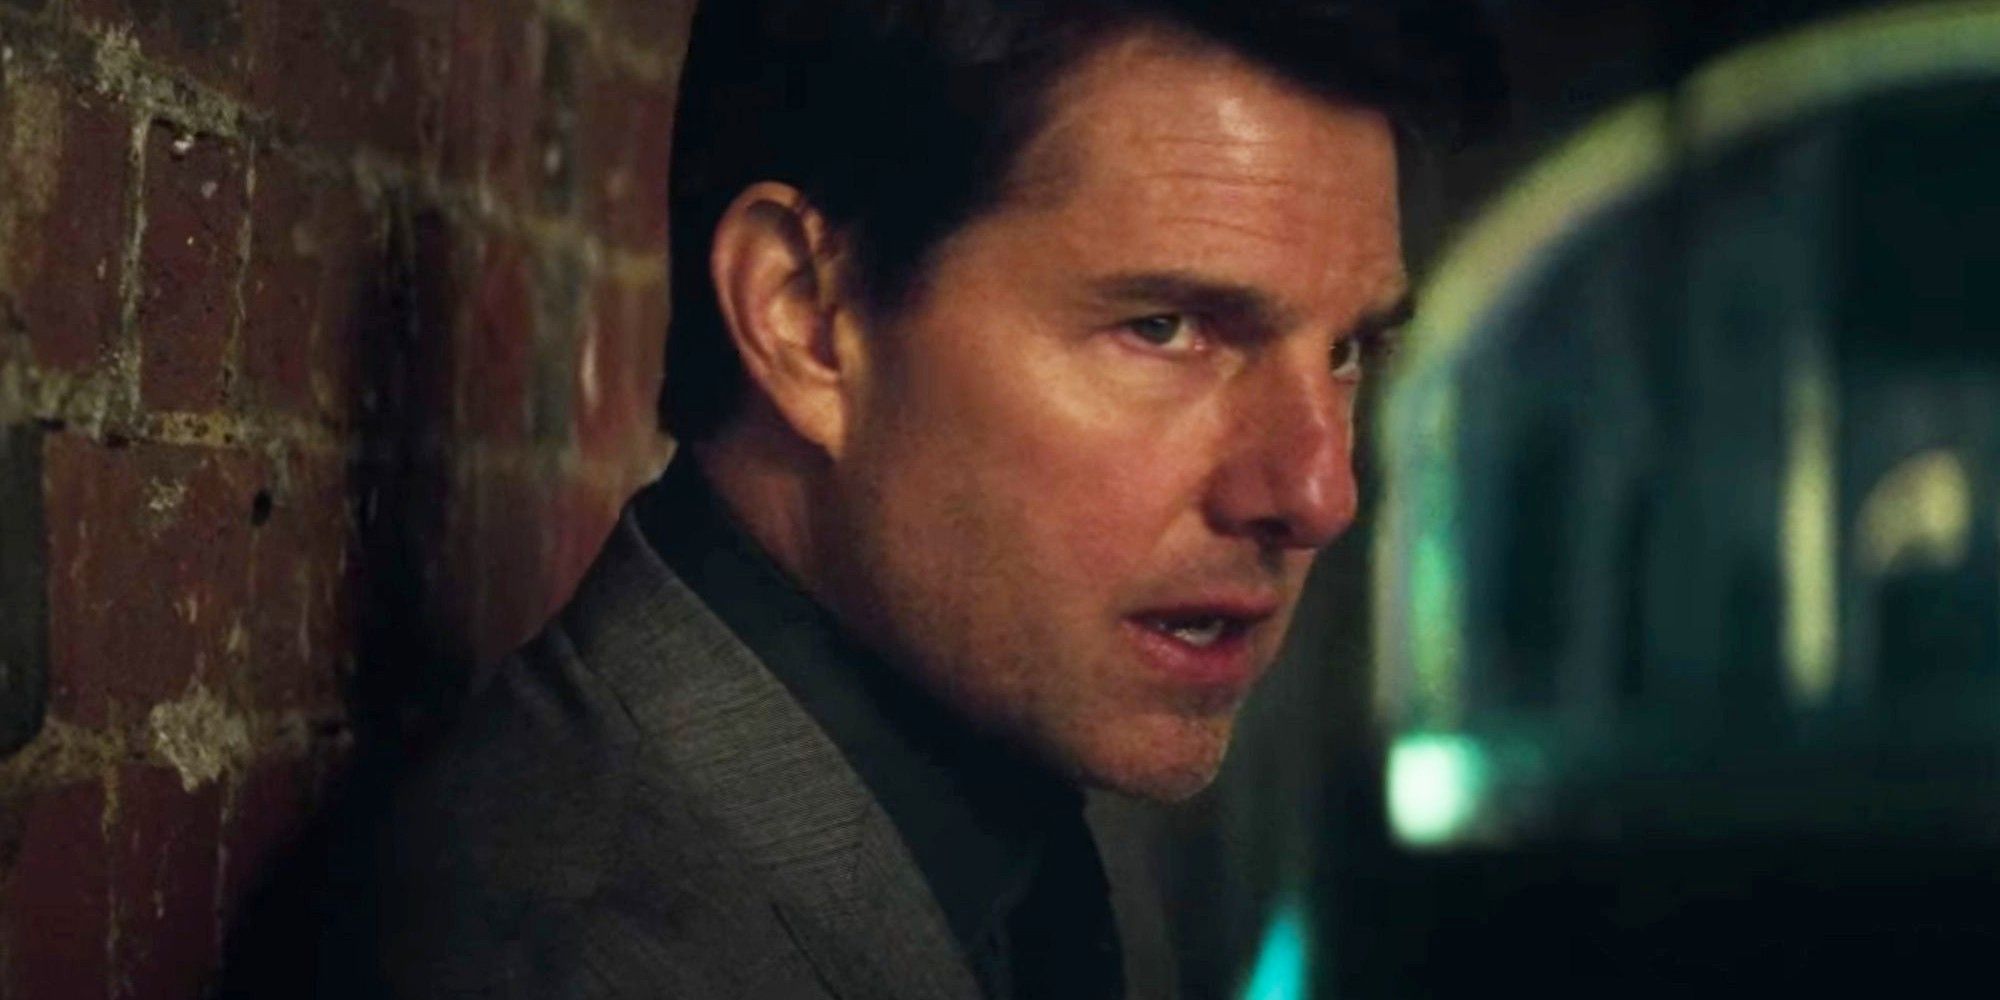 Mission: Impossible 7 Budget Reportedly $290 Million After Delays